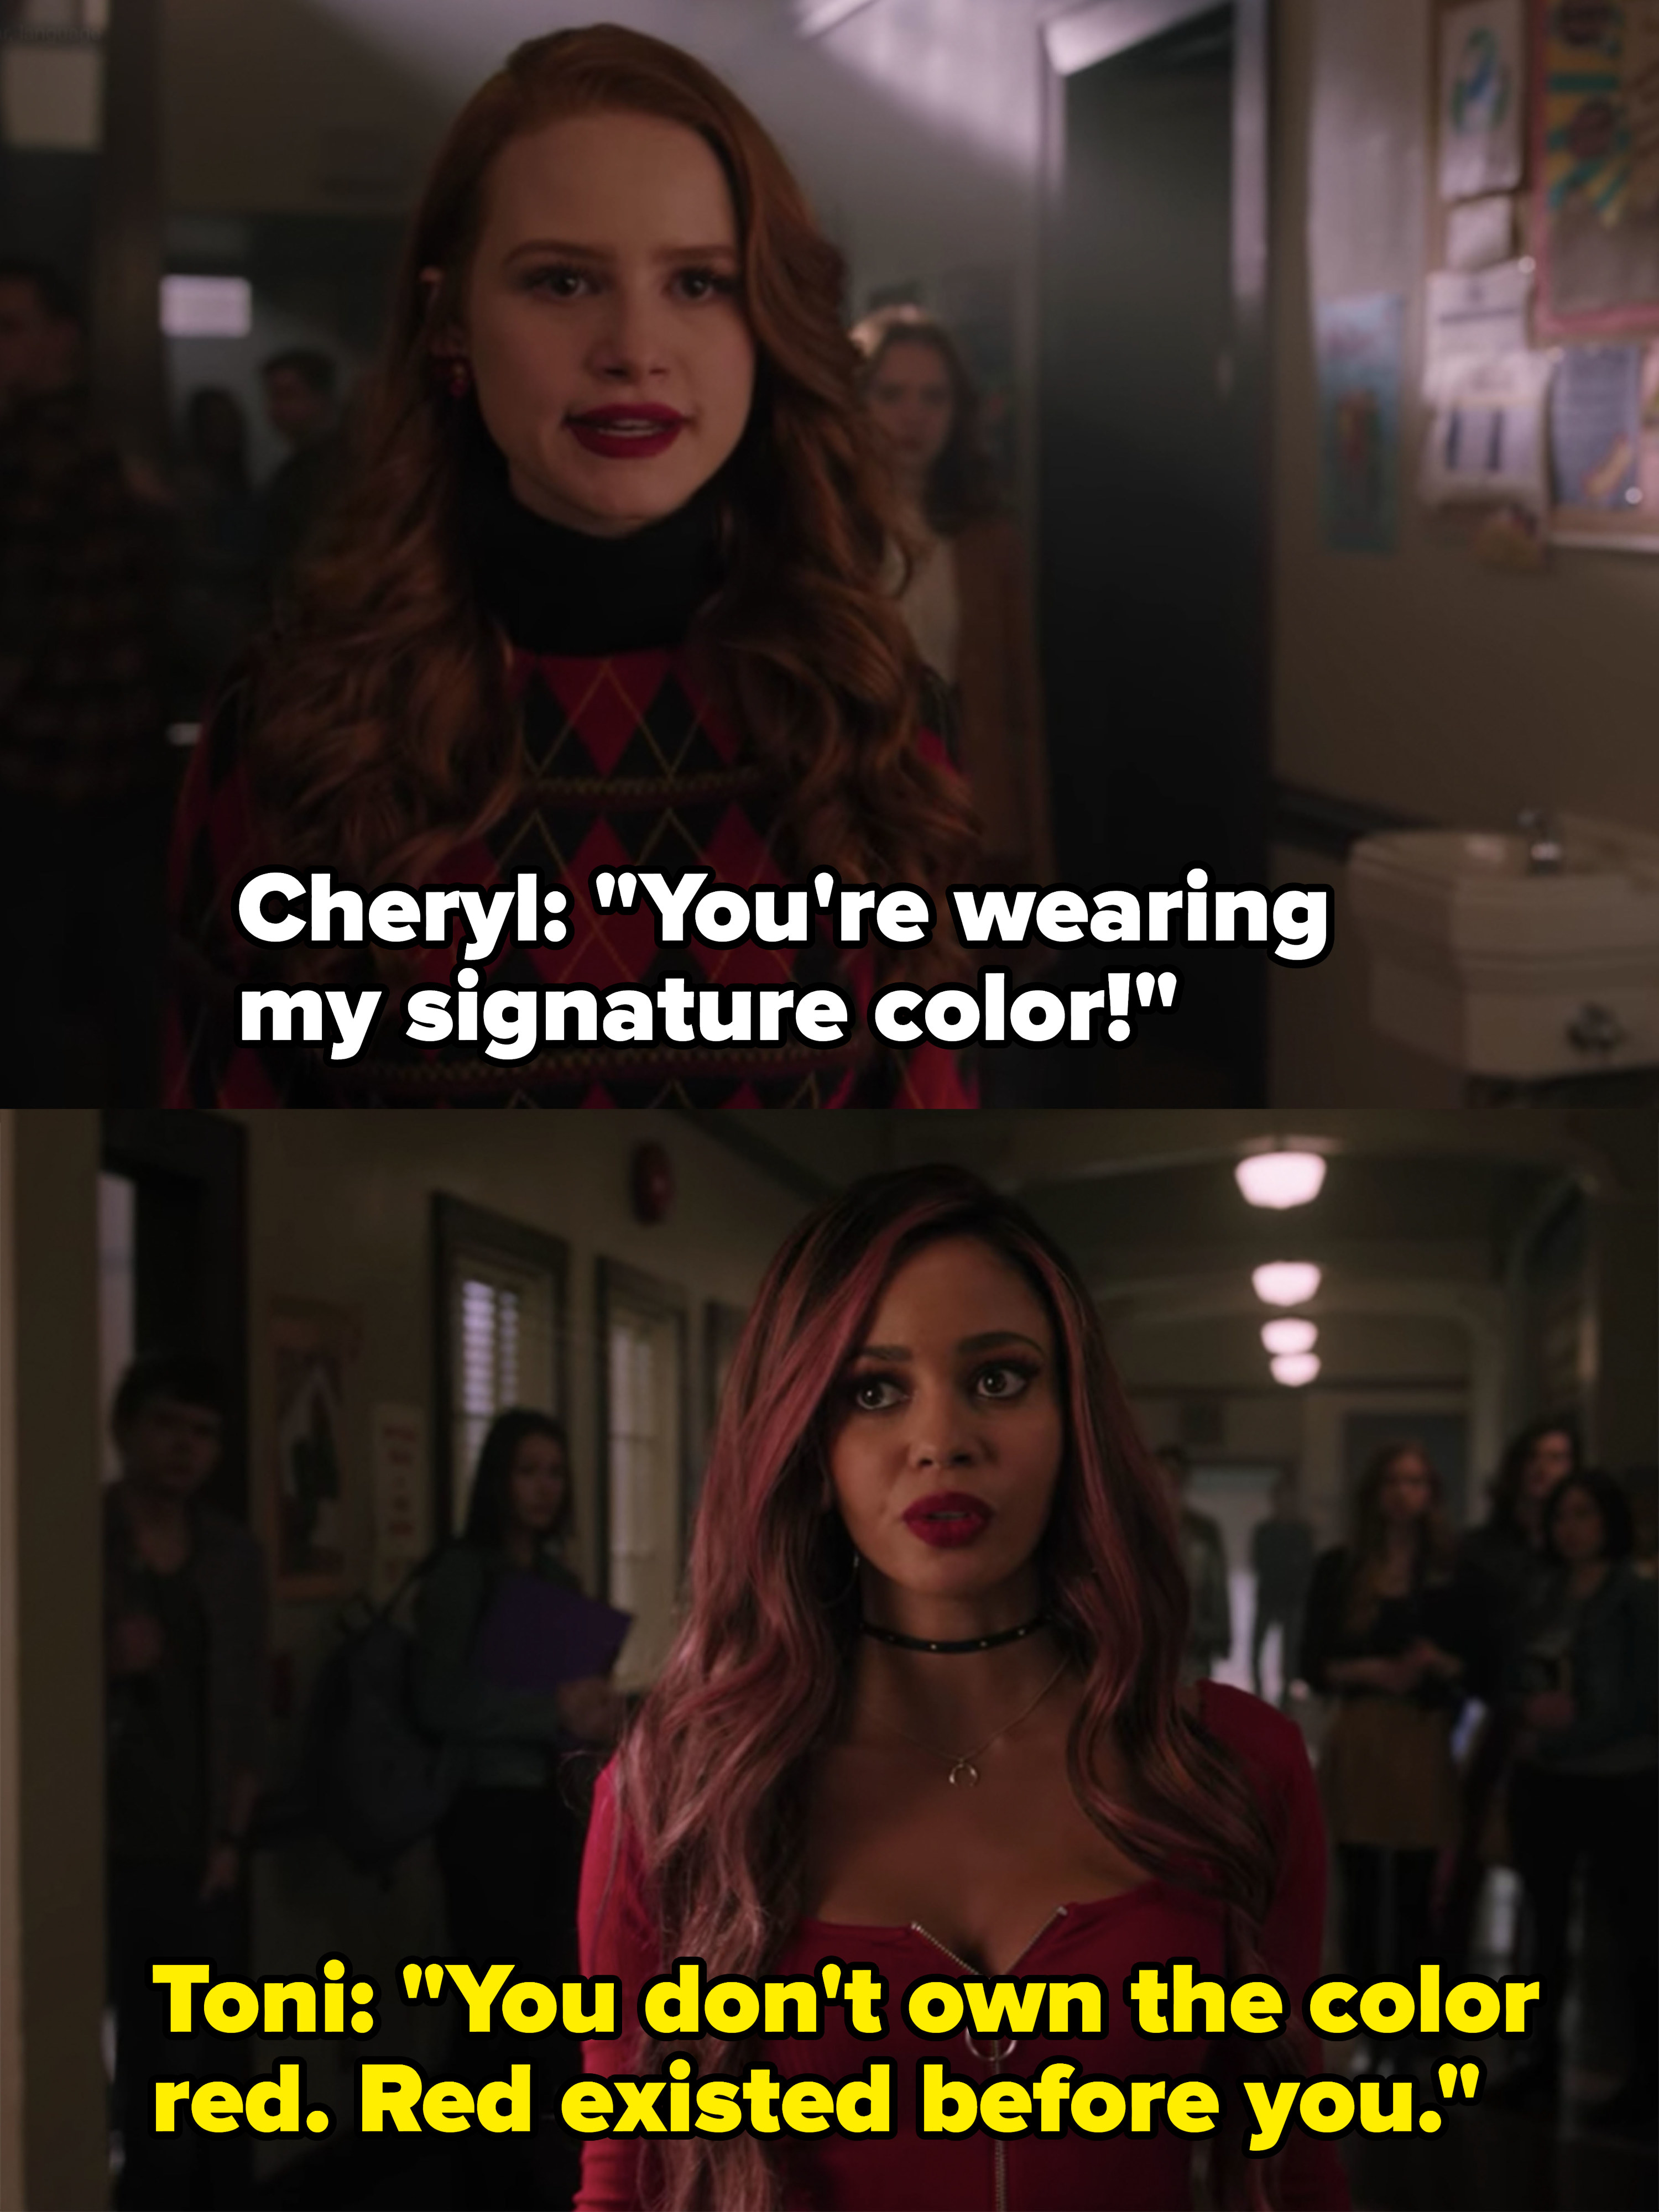 Cheryl gets mad at Toni for wearing her &quot;signature color&quot;